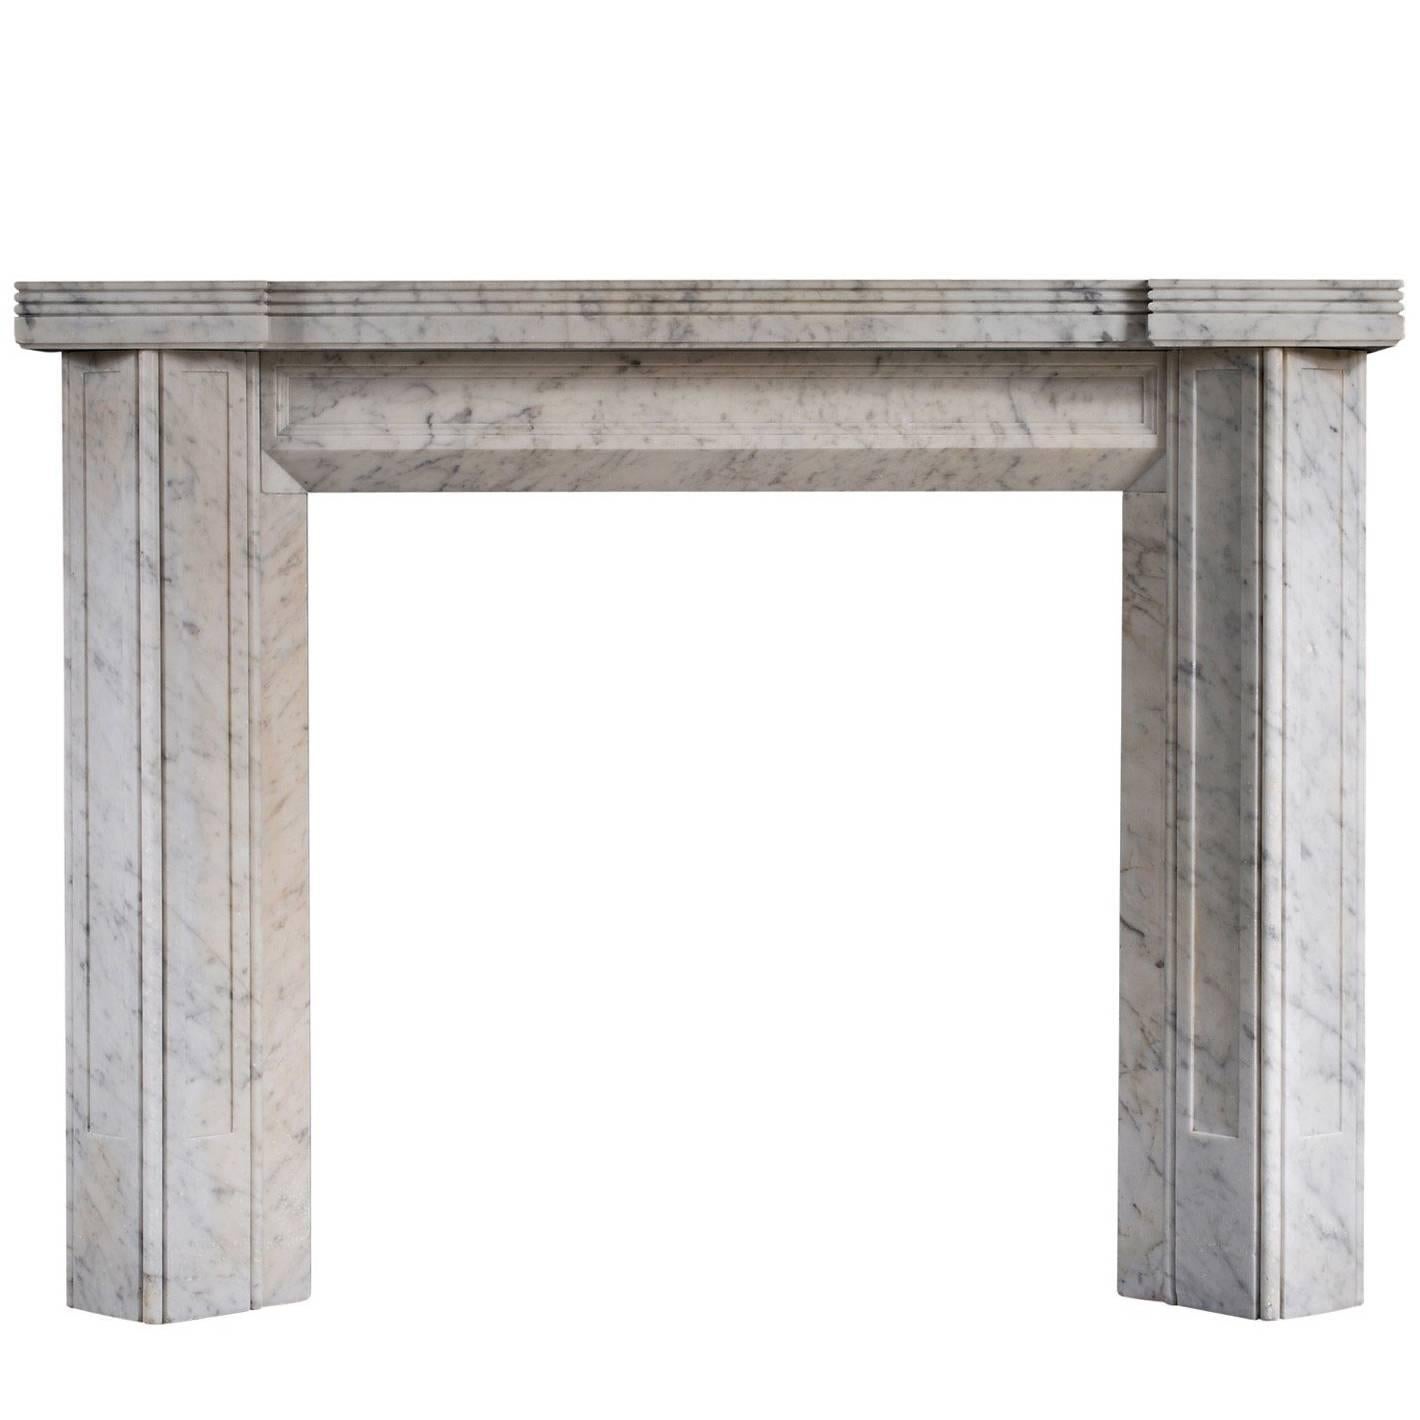 Unusual English Carrara Marble Fireplace in the Art Deco Style